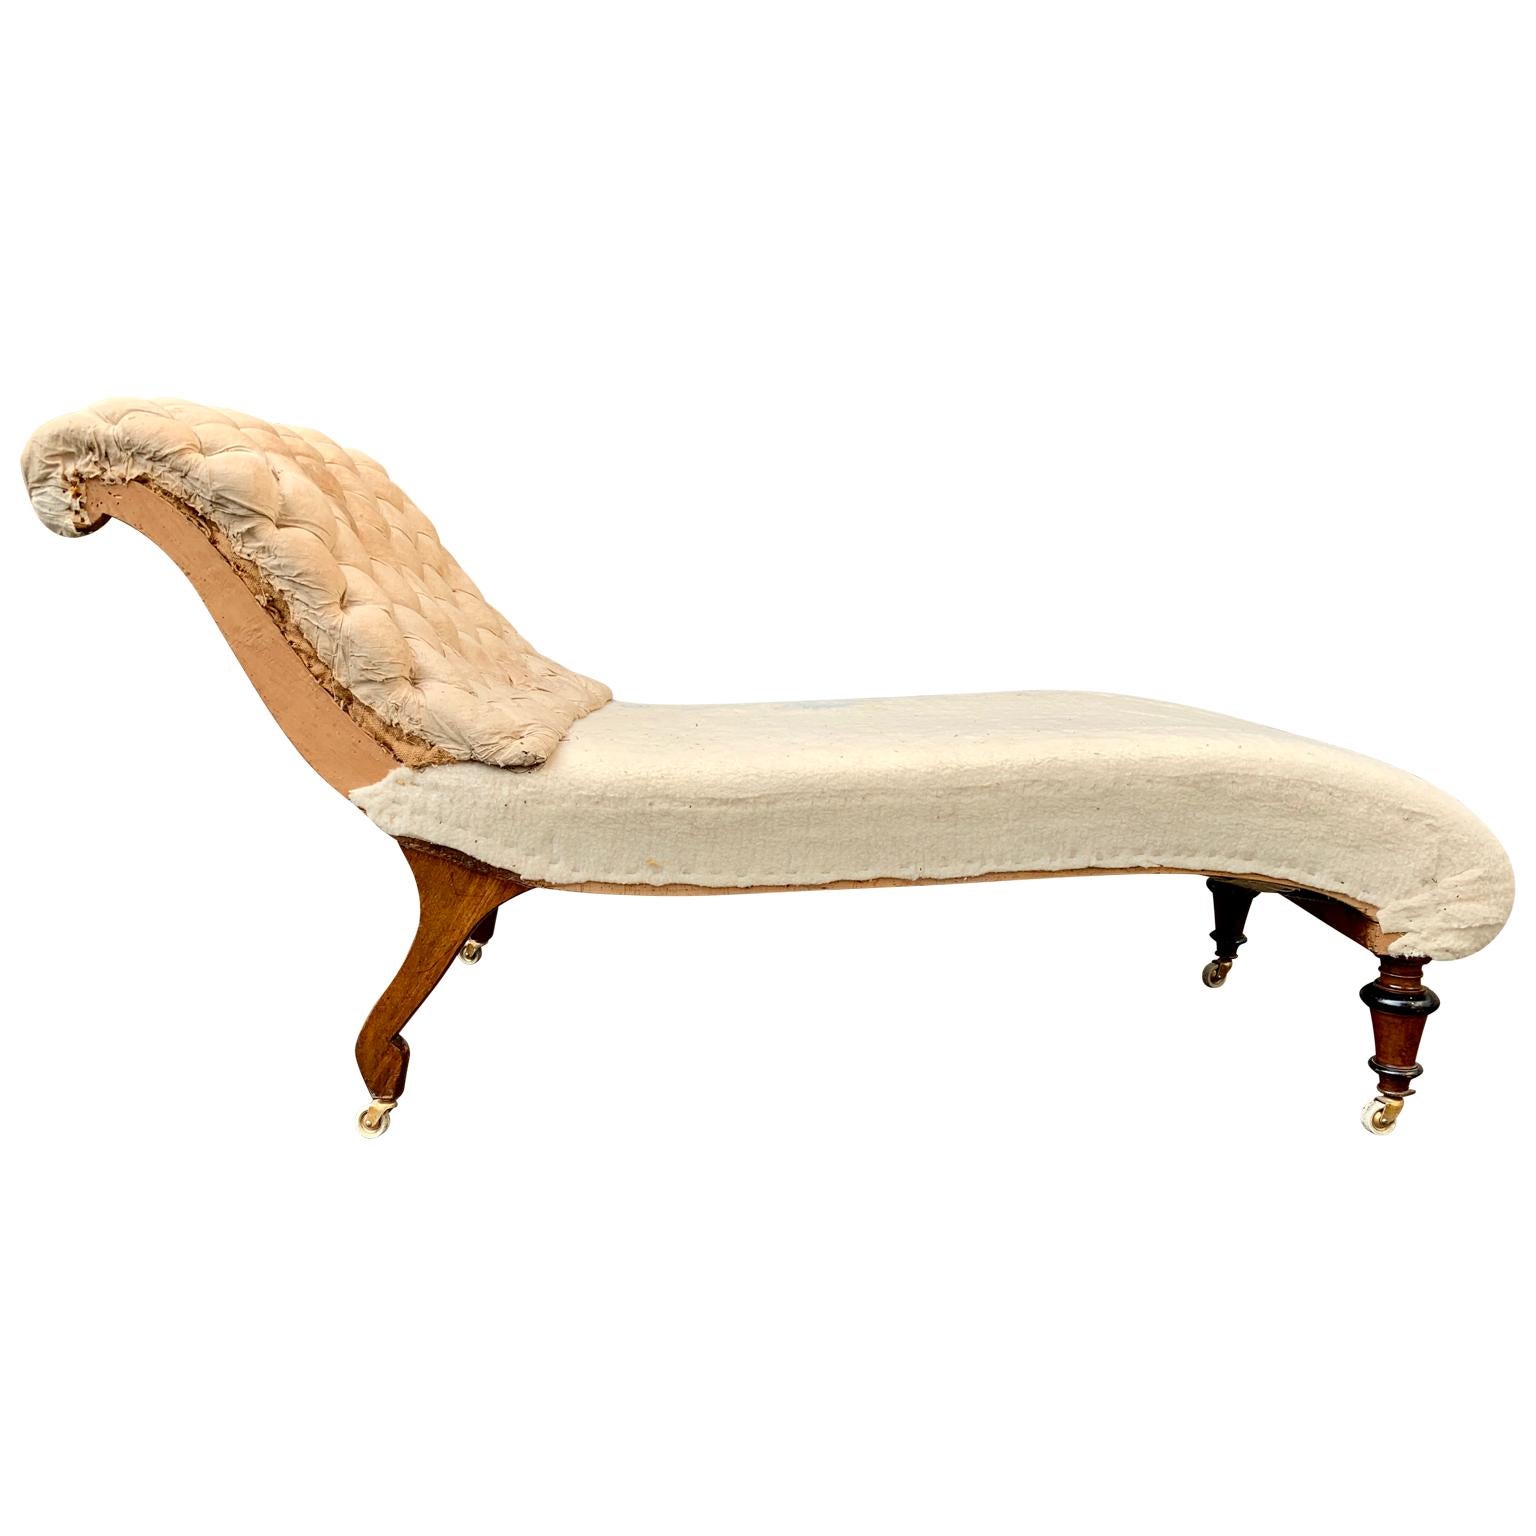 A Swedish daybed from the end of 19th century from the Napoleon III time also called in Sweden the Oskarian period from the name of the Regent king Oskar II.

Please note that this daybed is located in Halmstad Sweden.
We offer affordable delivery